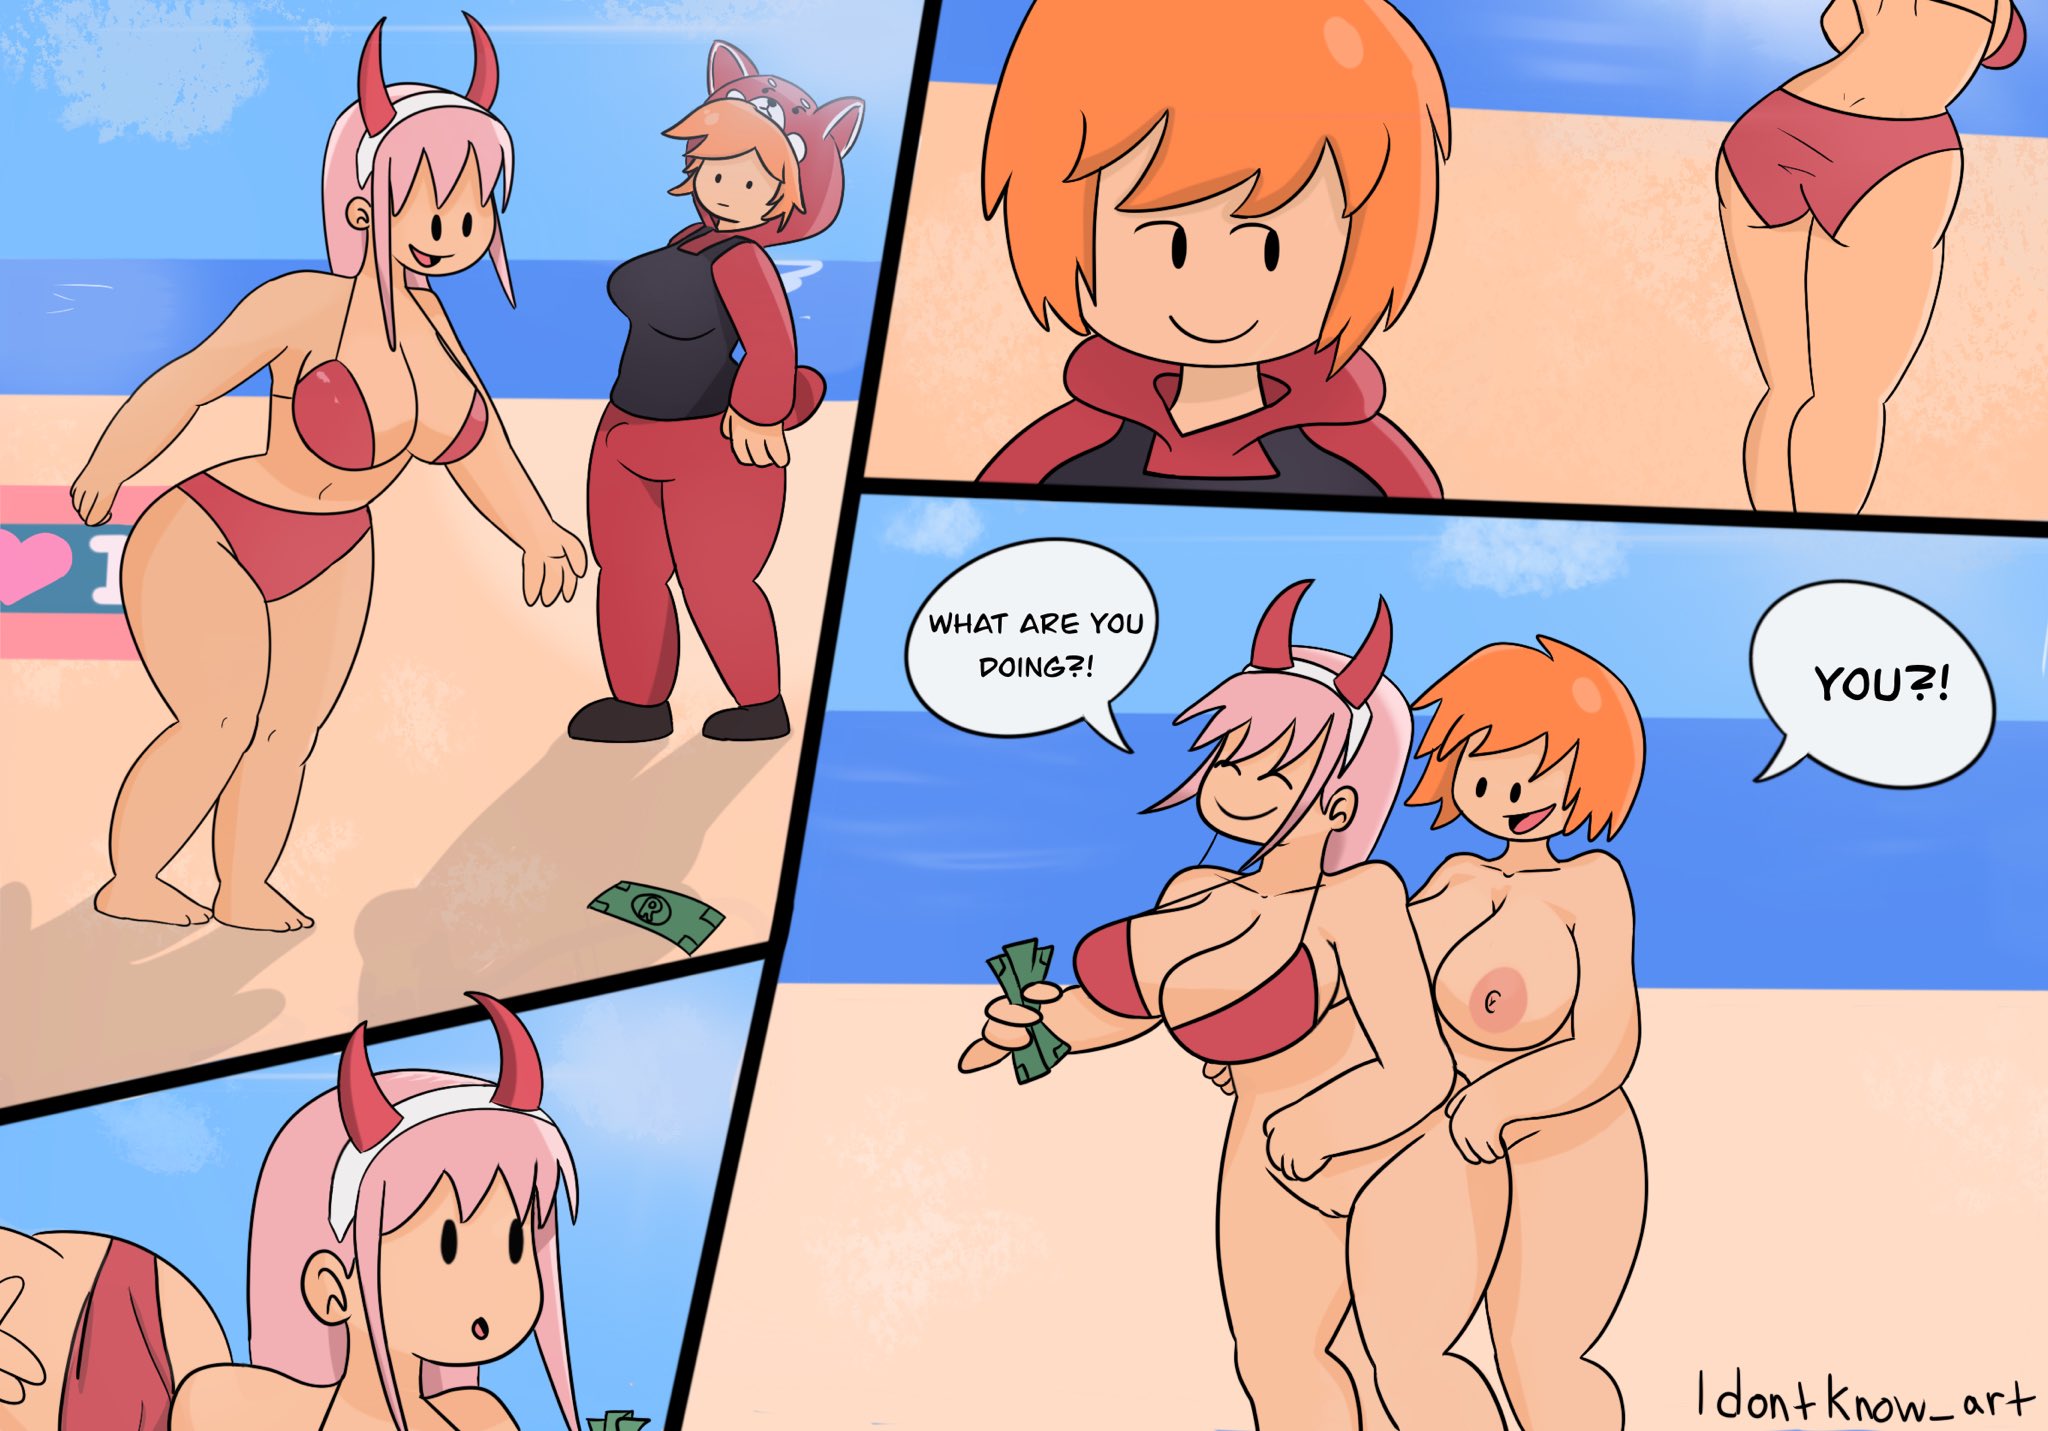 “Red panda and Ace pilot roblox comic #rr34 #robloxporn #nsfw” .